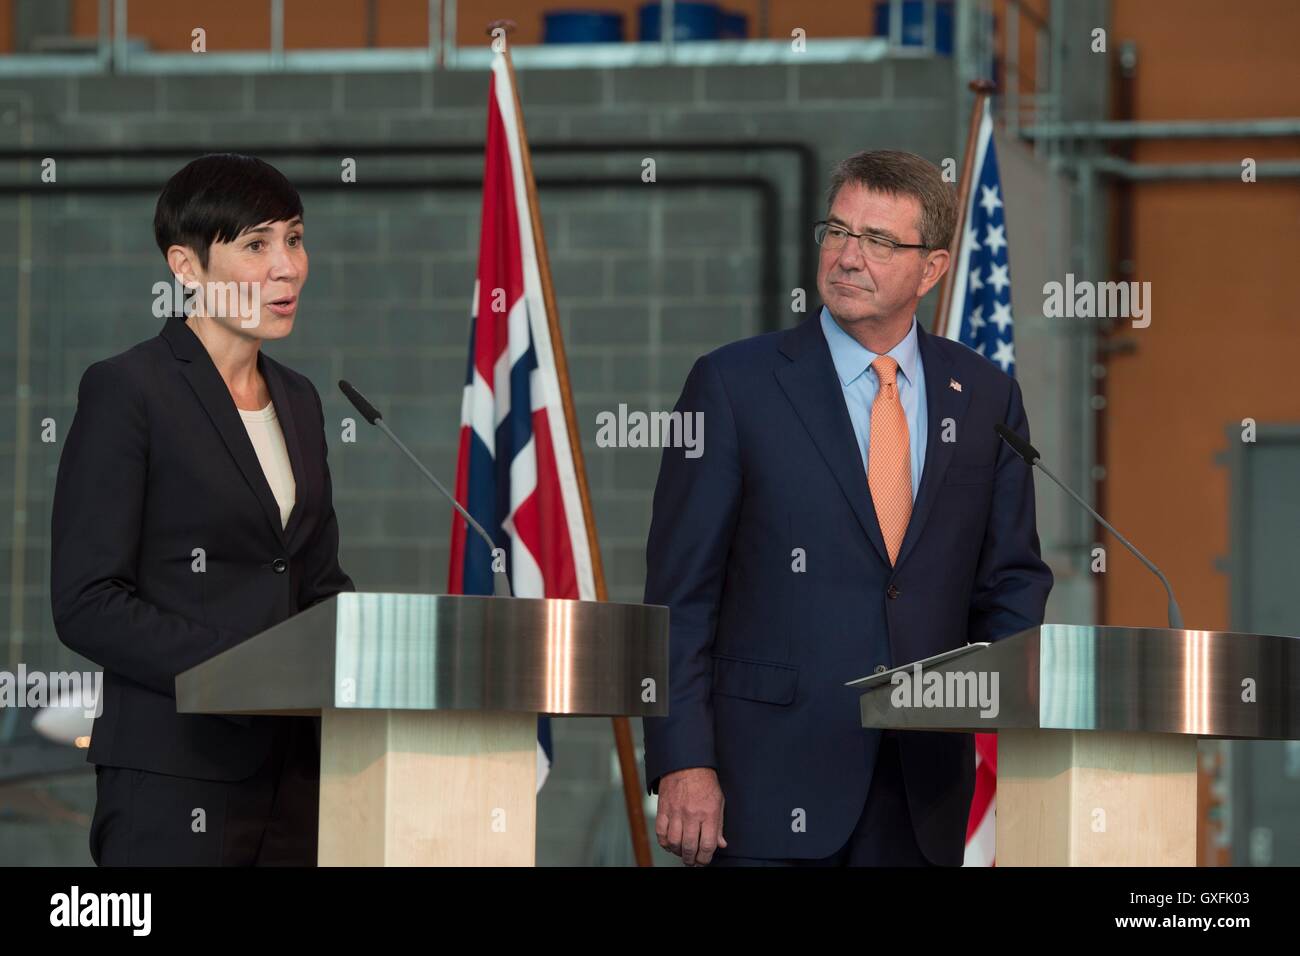 U.S. Secretary of Defense Ashton Carter during a joint press conference with Norwegian Minister of Defense Ine Eriksen Soreide September 9, 2016 in Oslo, Norway. Stock Photo